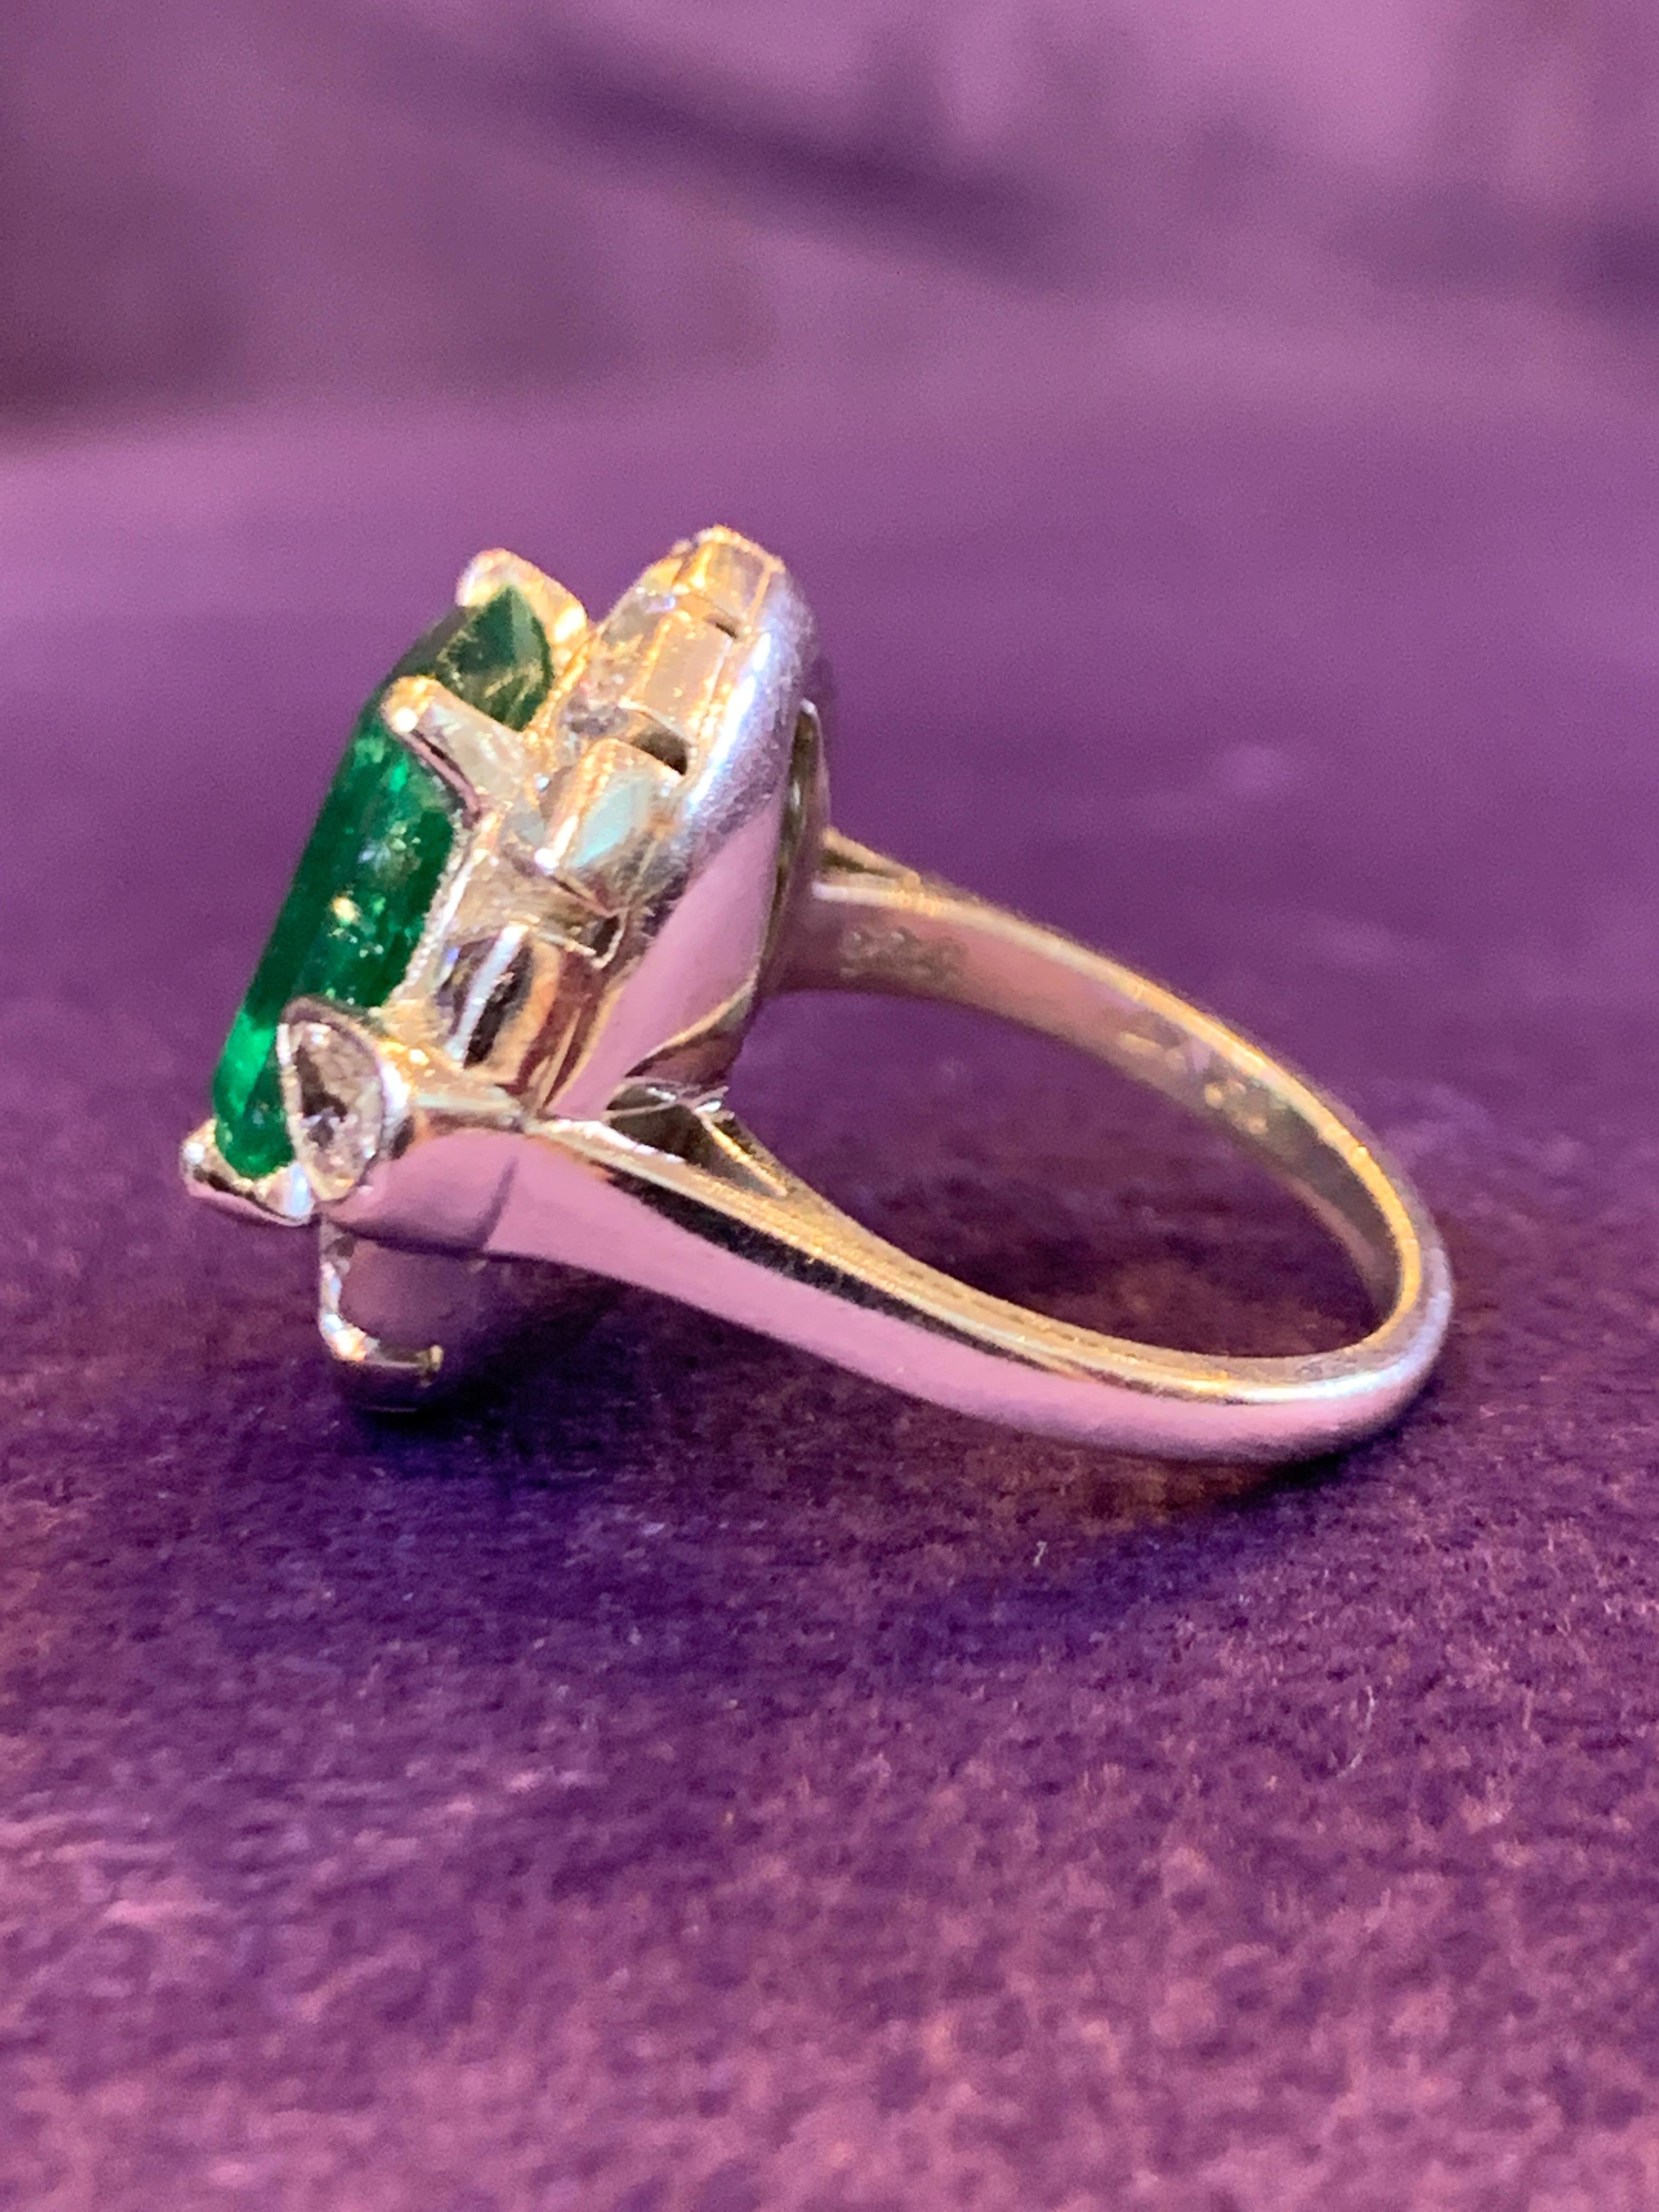 Emerald Cocktail Ring In Excellent Condition For Sale In New York, NY